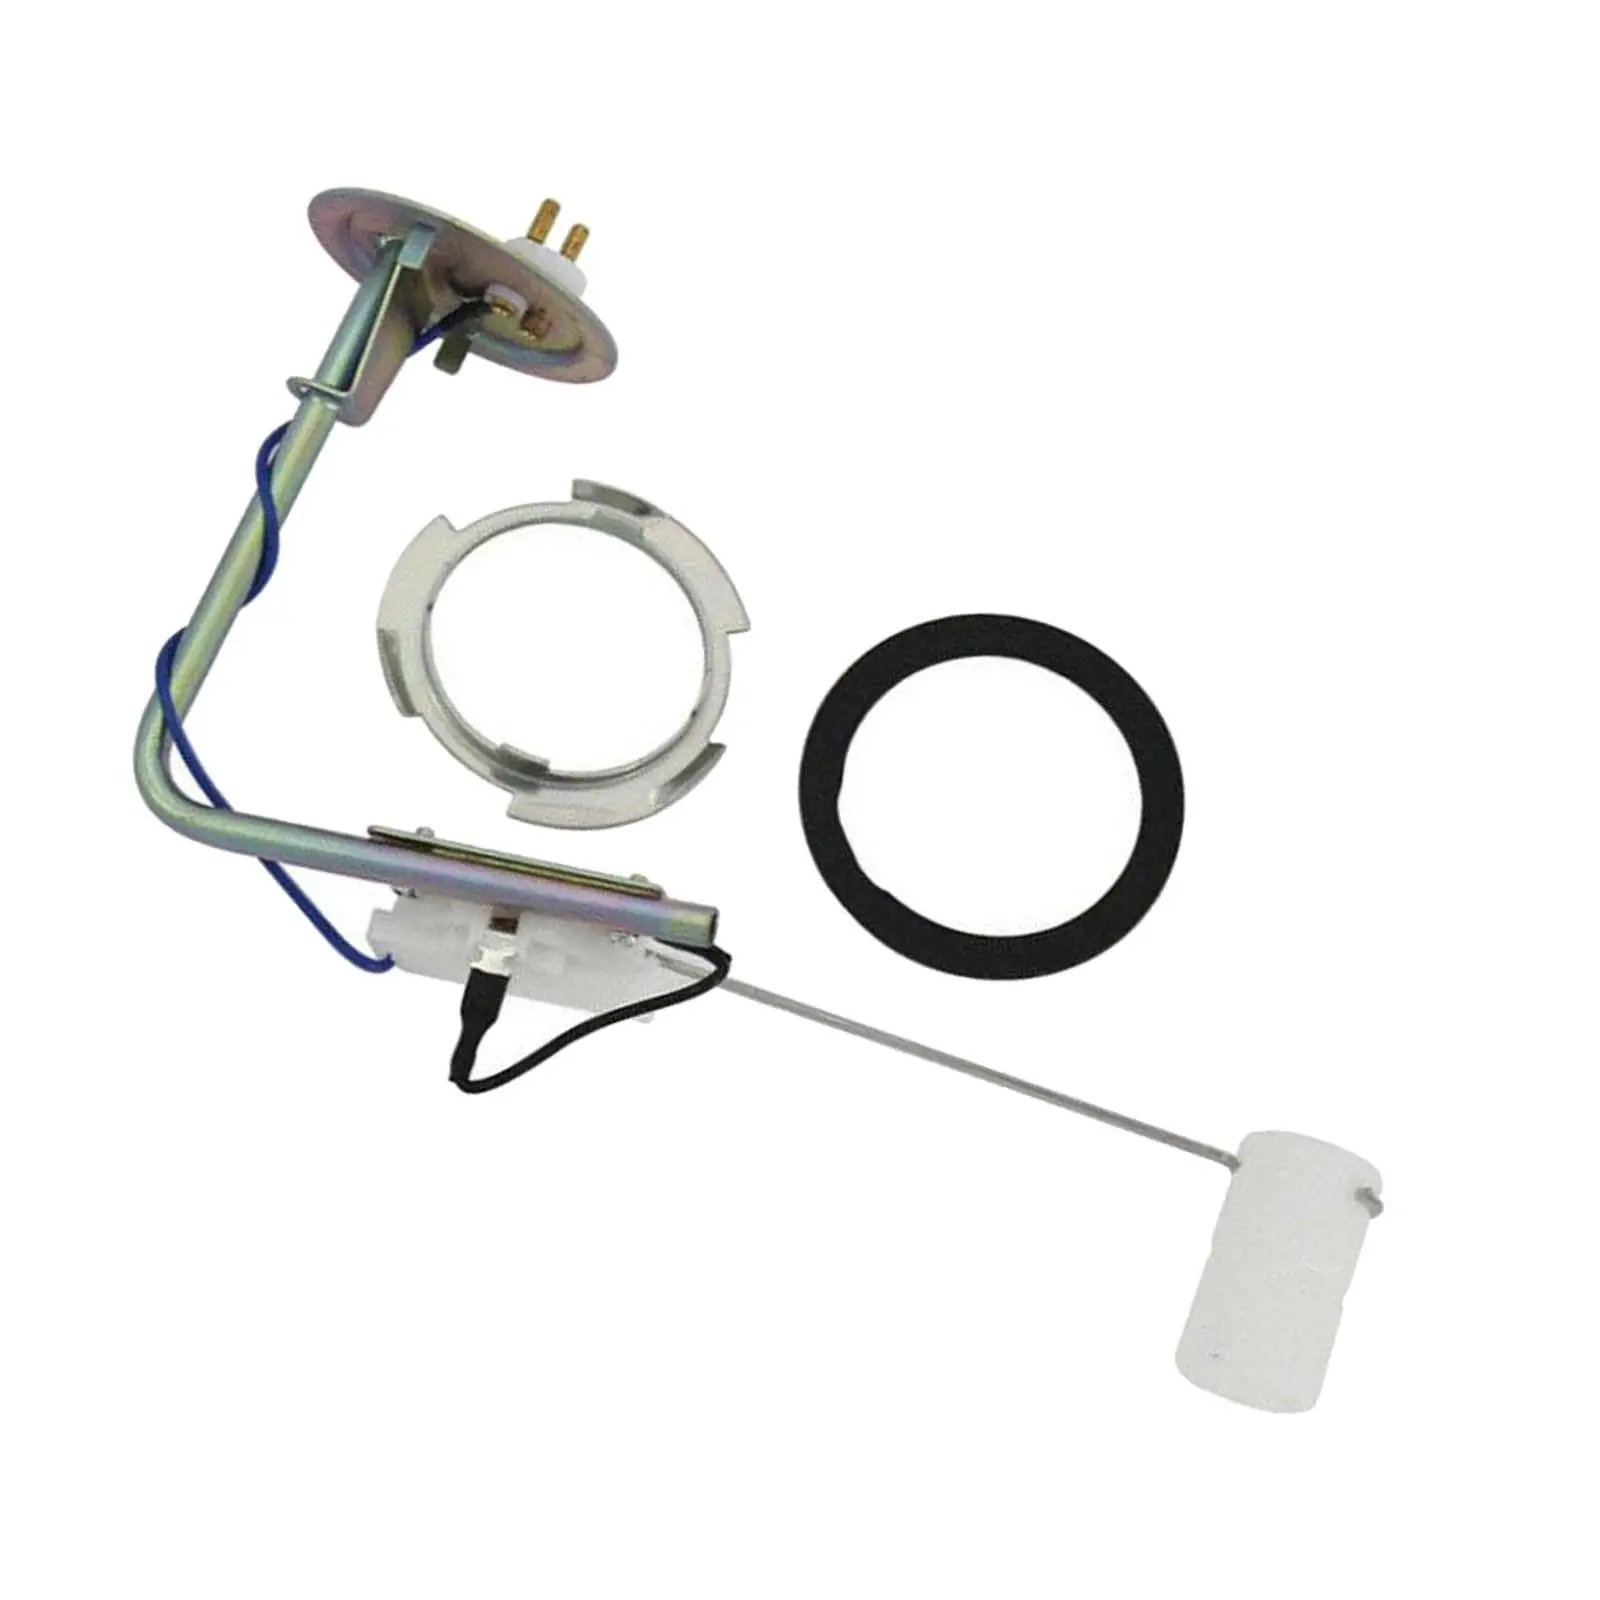 Fuel Pump Sender Spare Parts Assembly for Lincoln Mercury 1980-1989